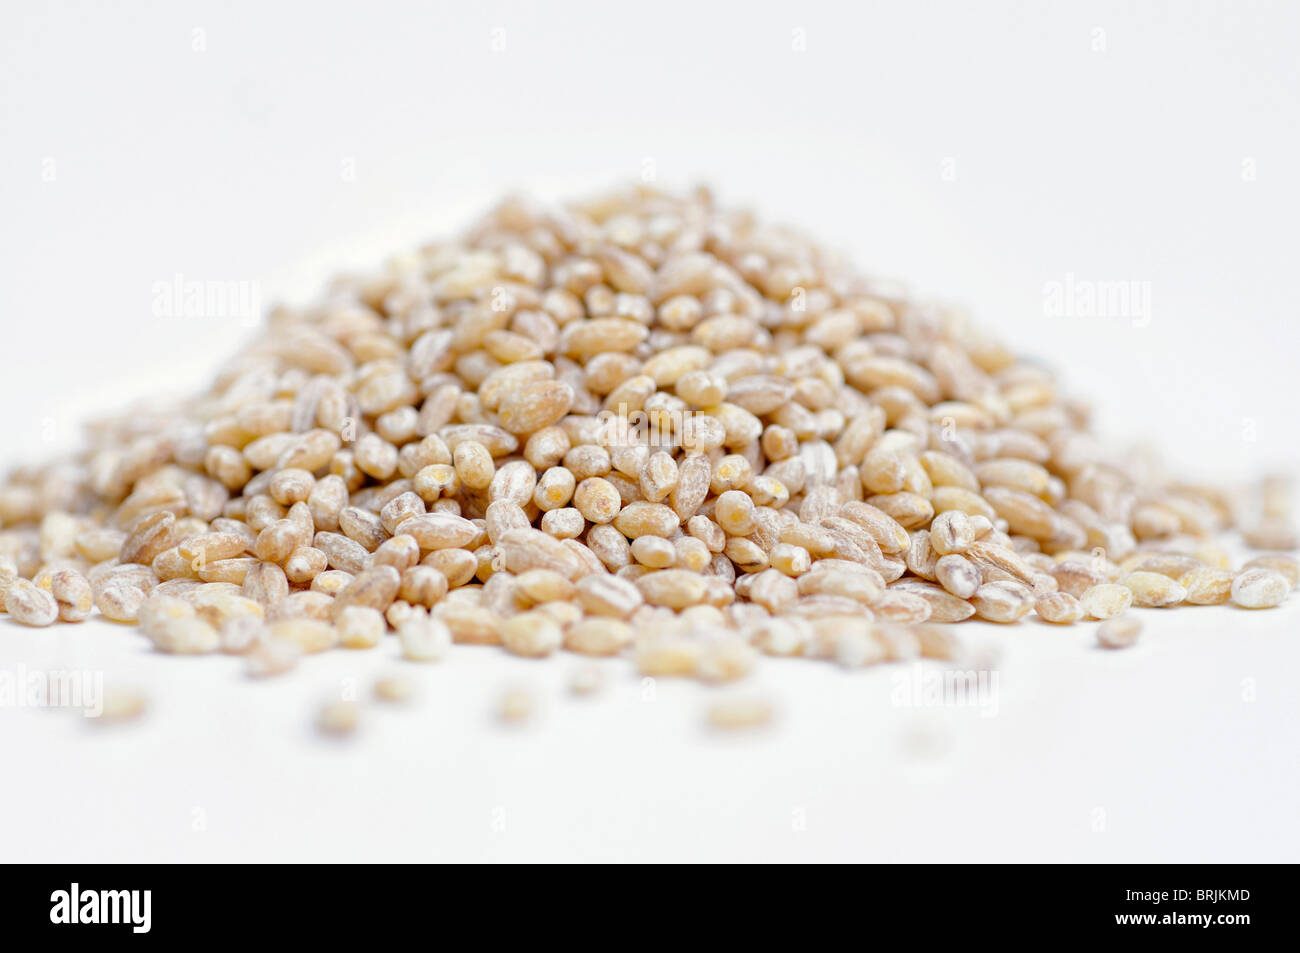 Pile of brown pearl barley on white background Stock Photo